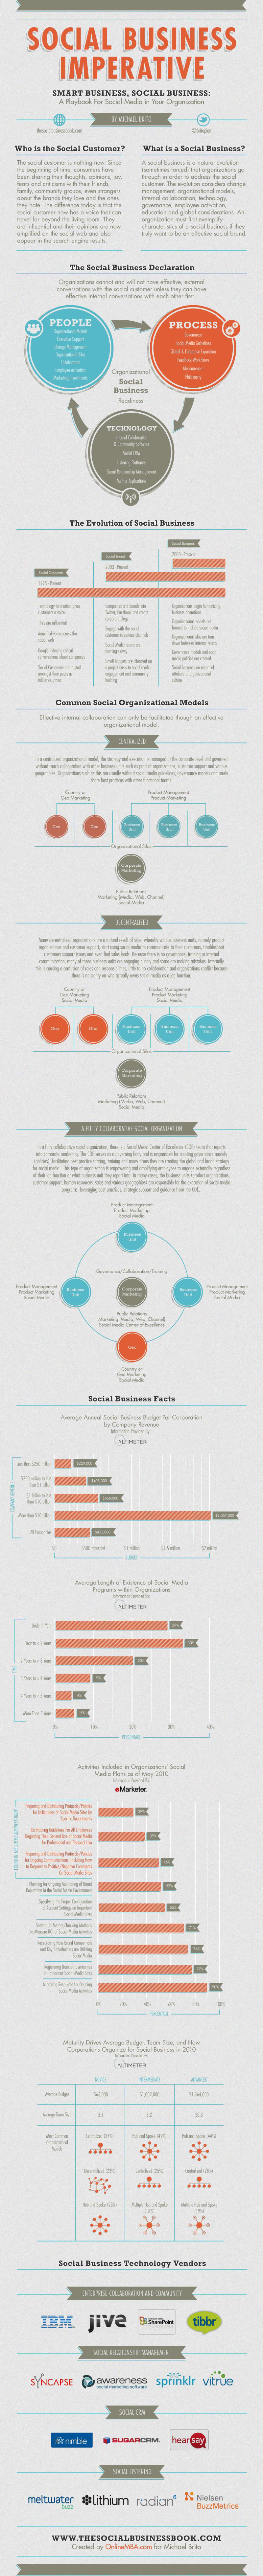 The Social Business Book